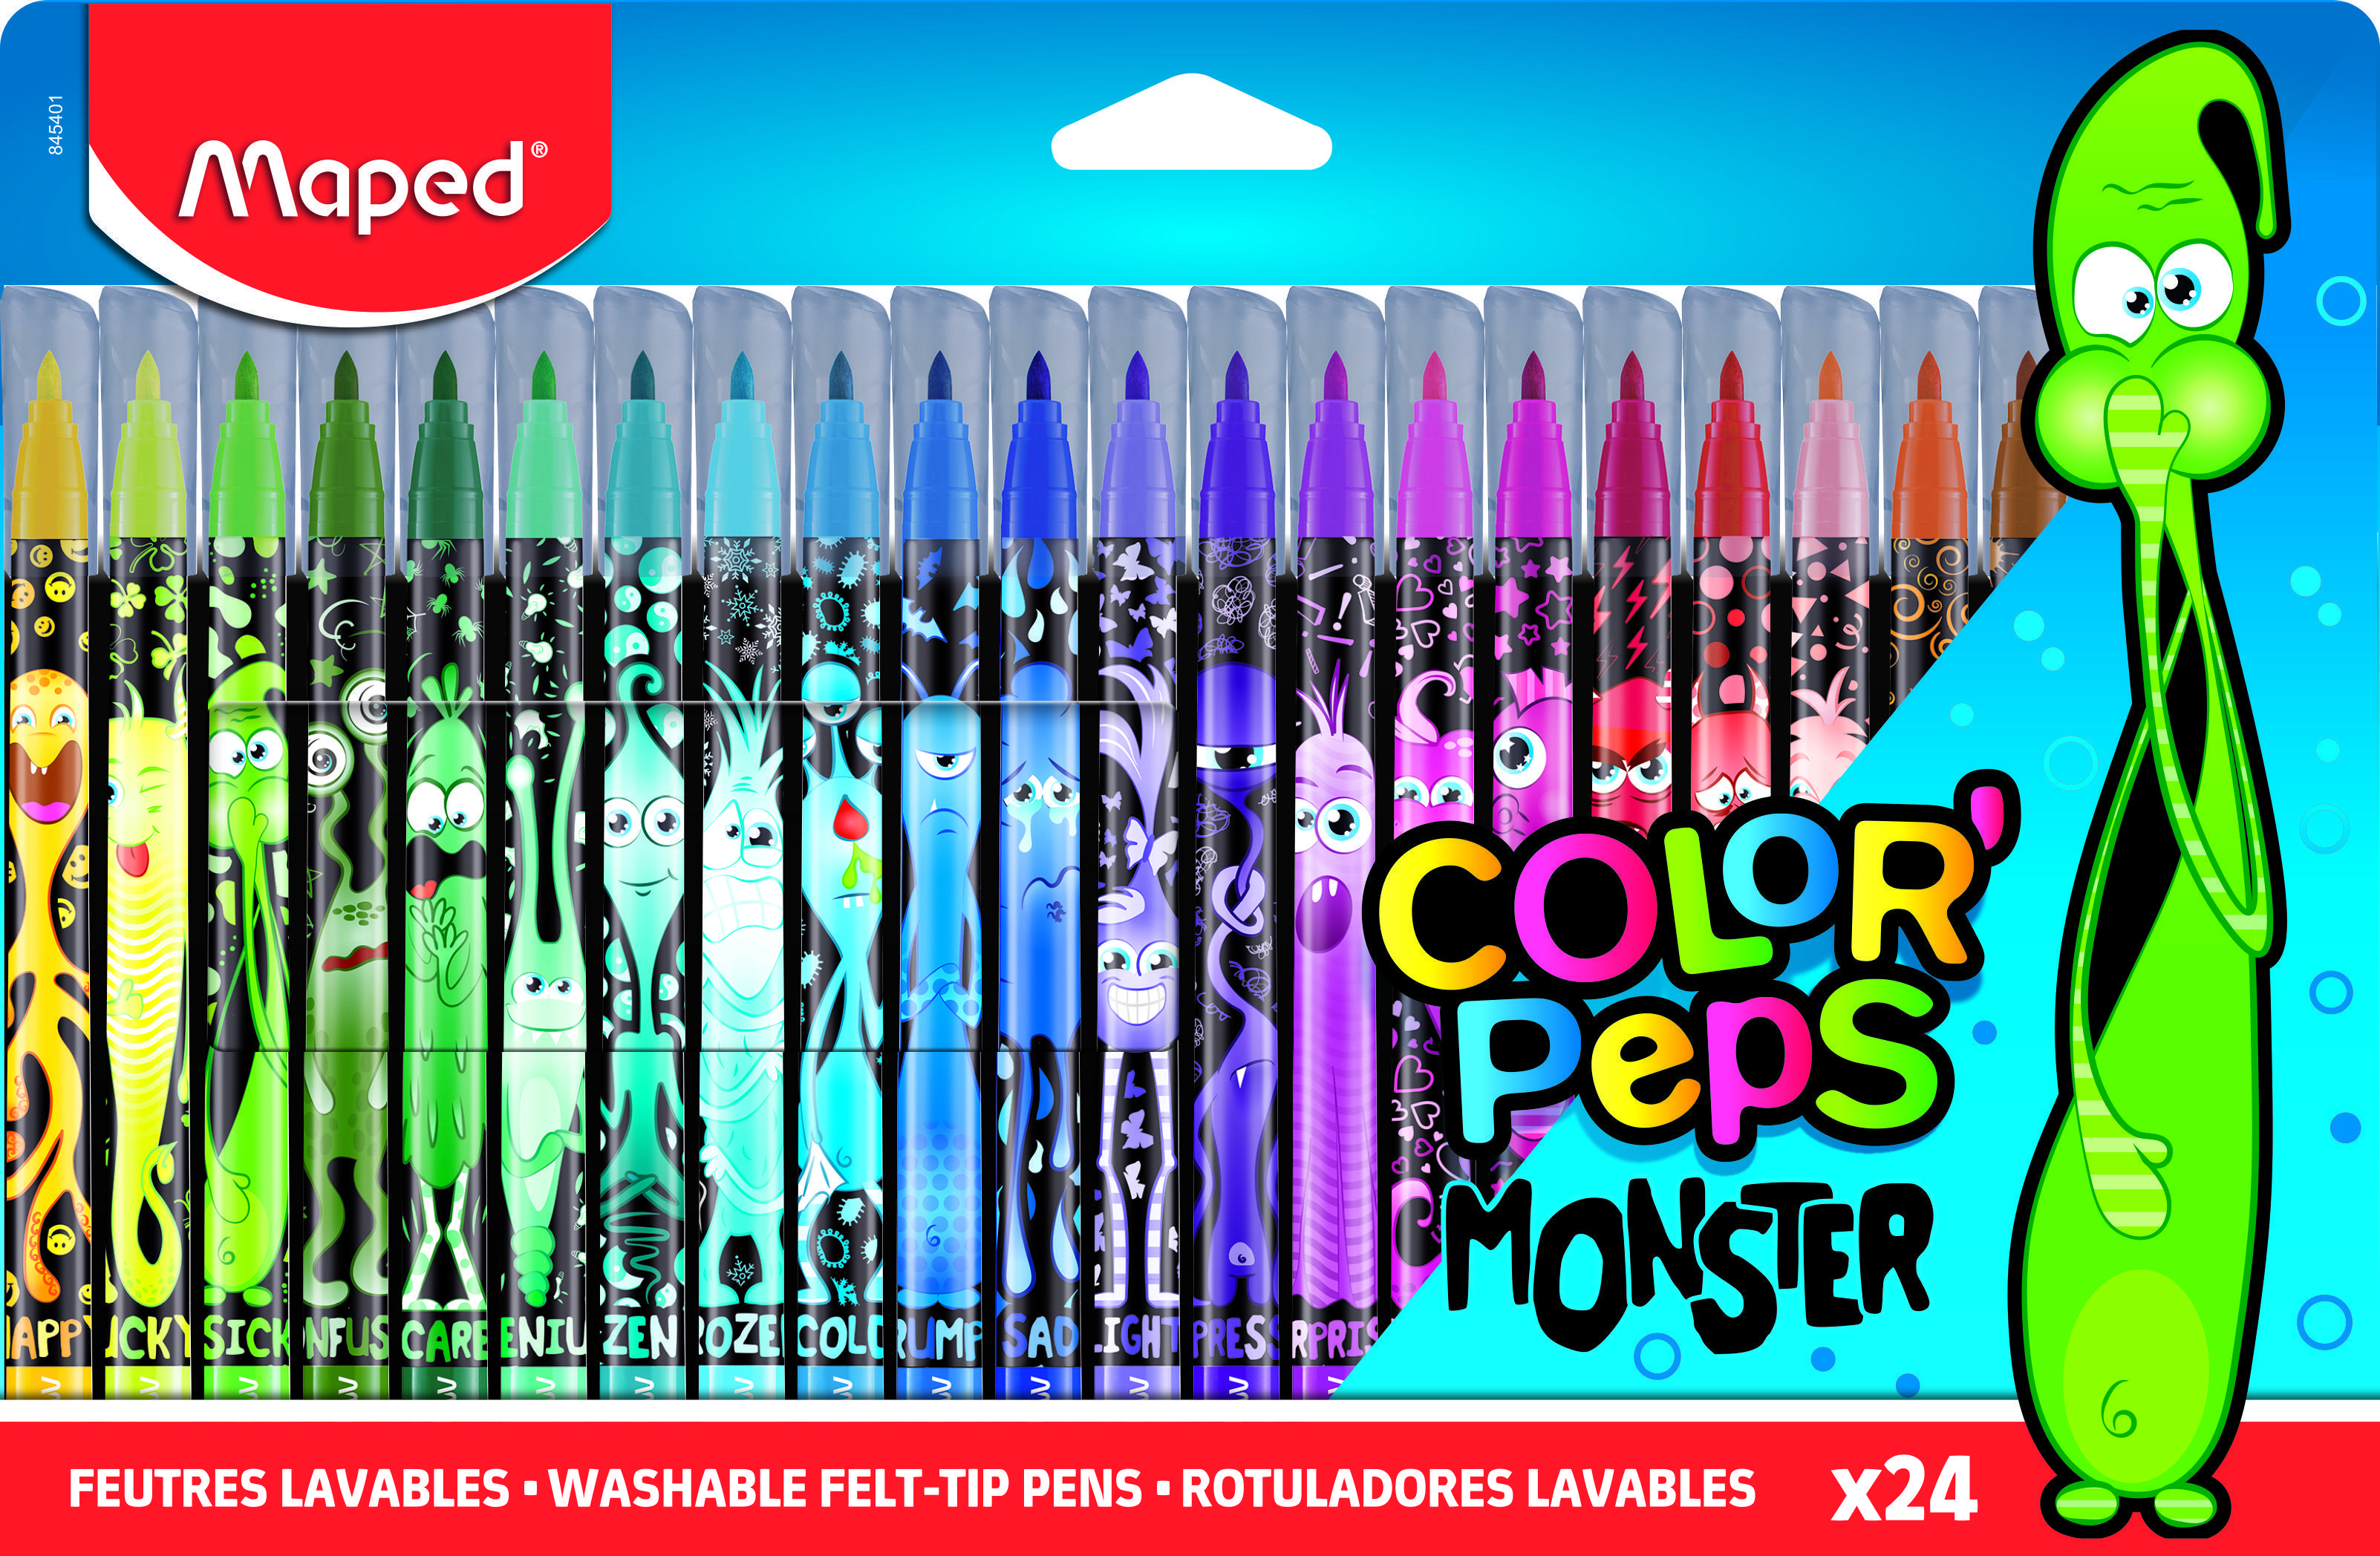  MAPED COLOR'PEPS MONSTER    ,   , , ,   , 24  